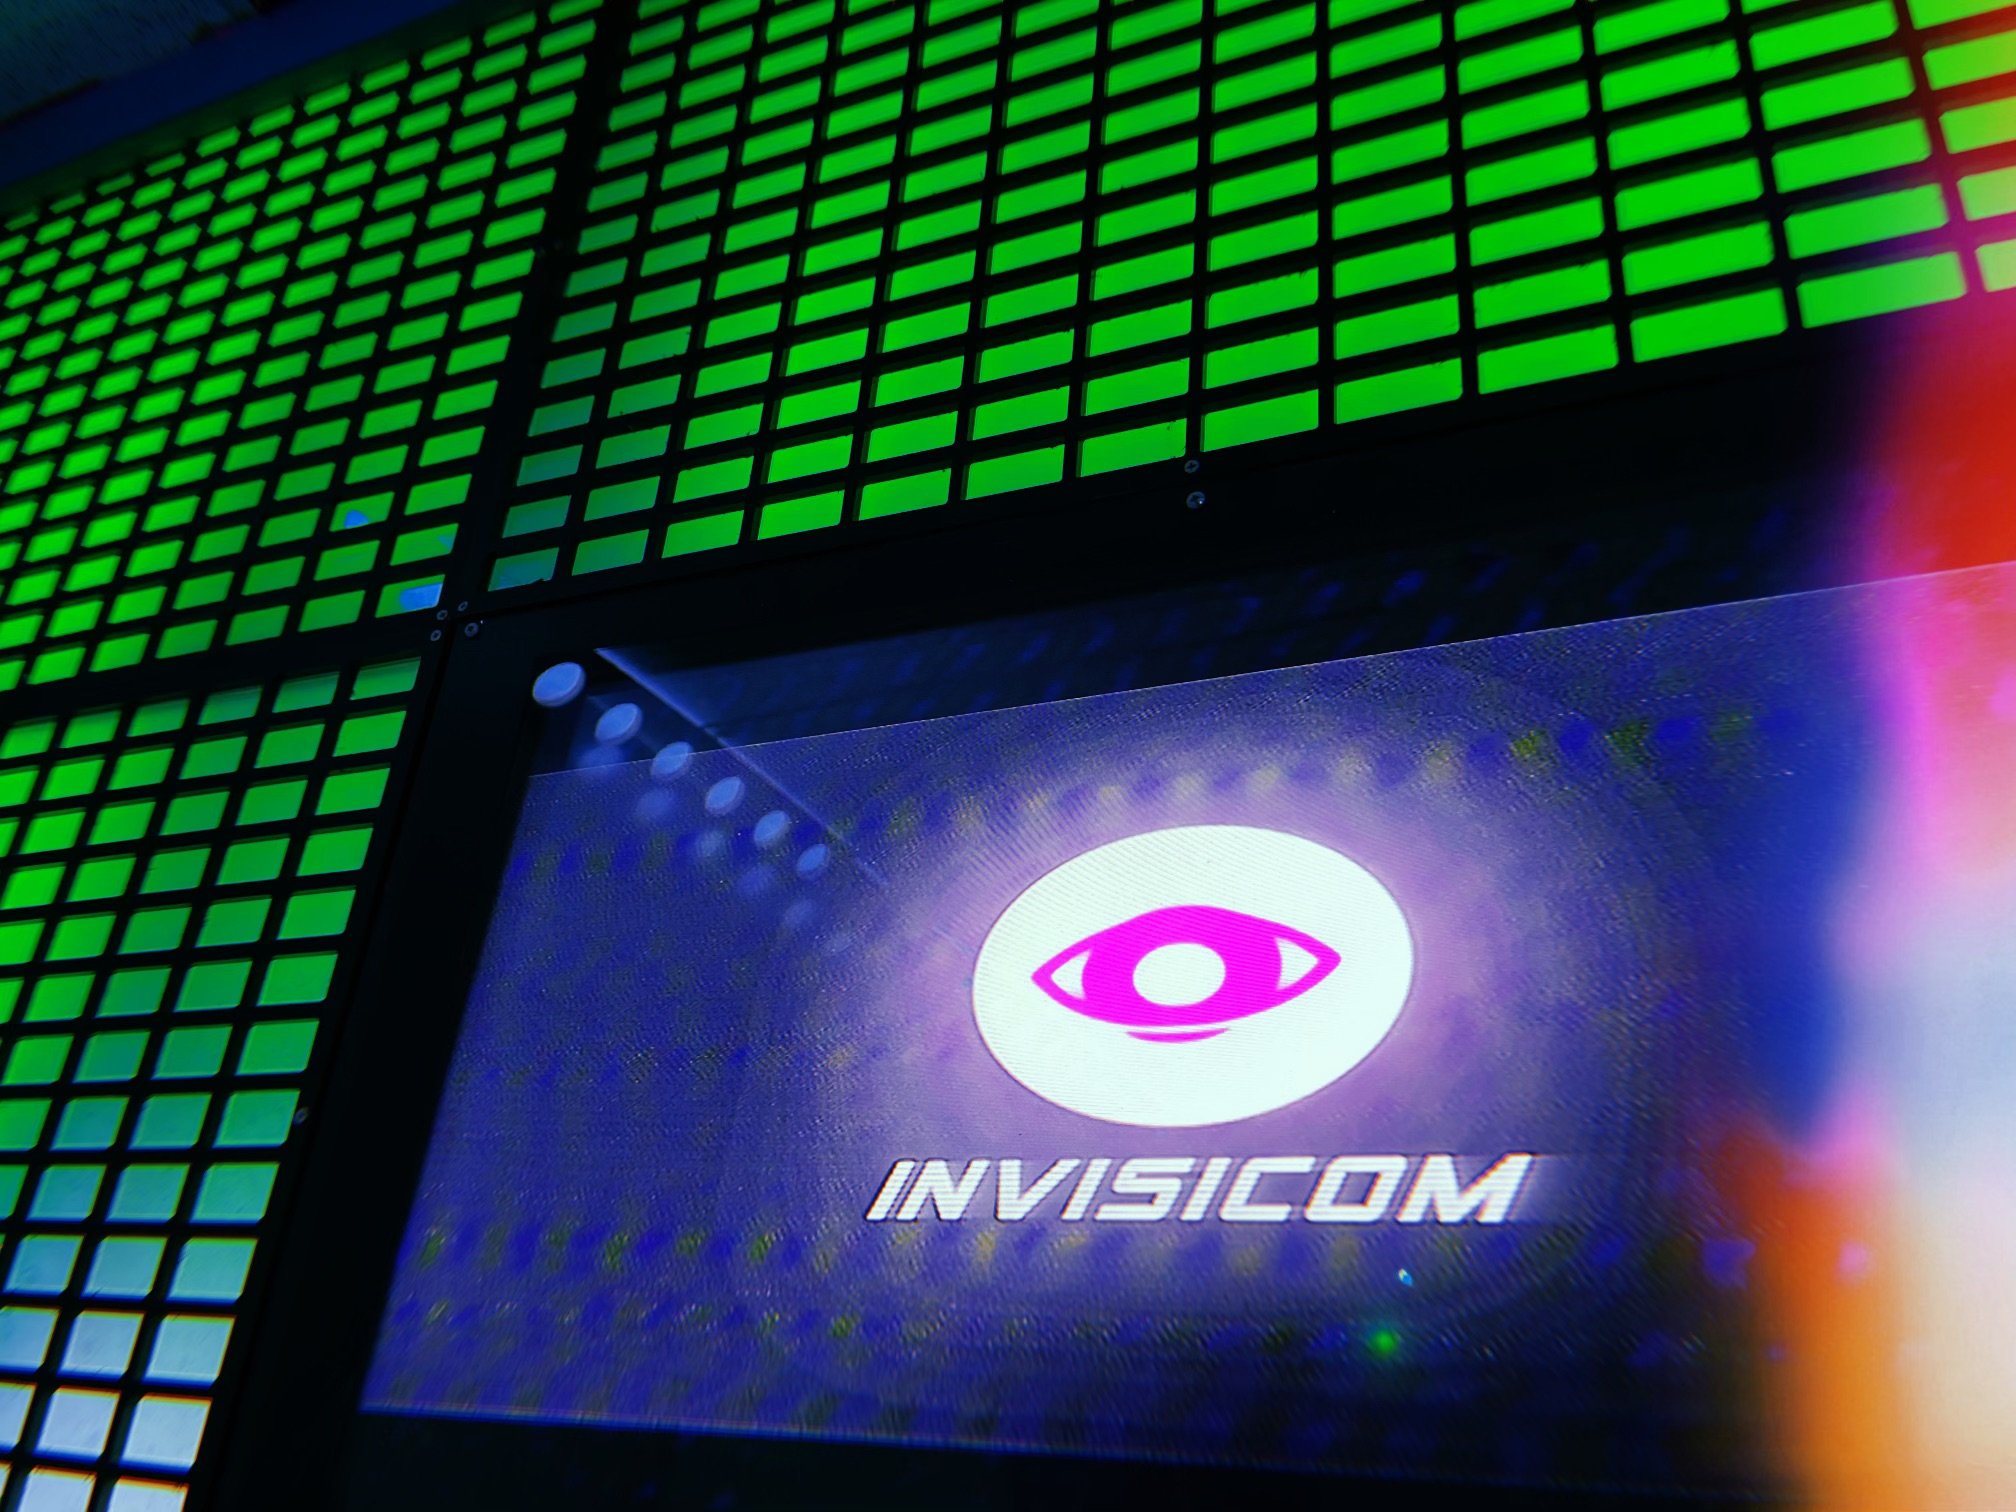  Invisicom displays on the screens. The computer glows green 